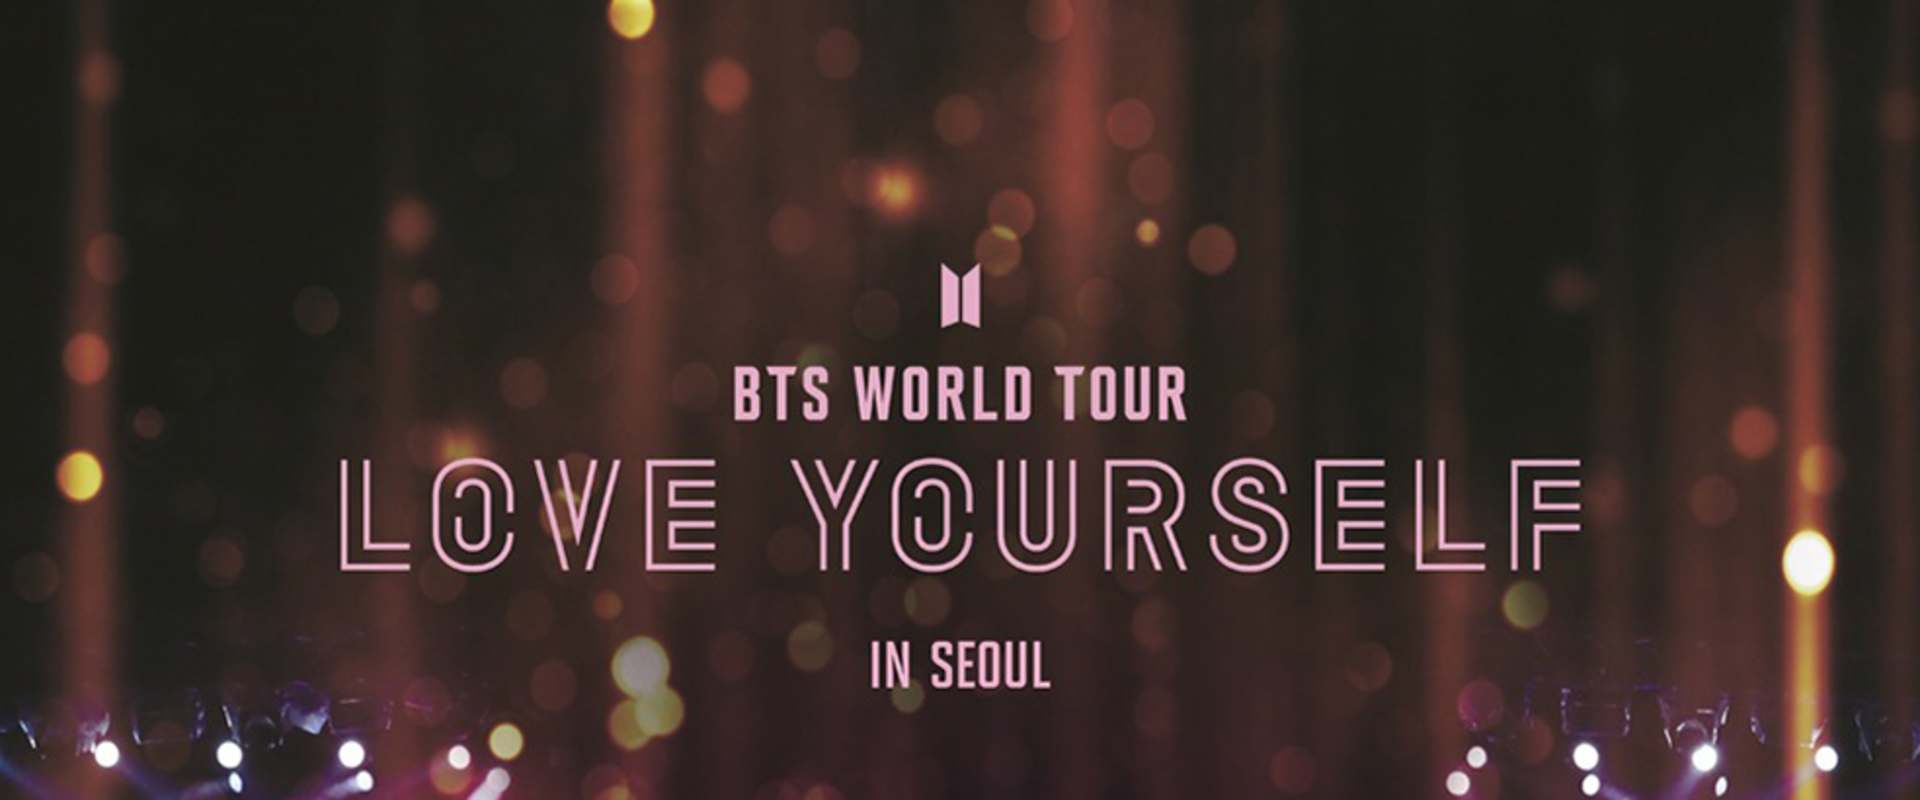 BTS World Tour: Love Yourself in Seoul background 1